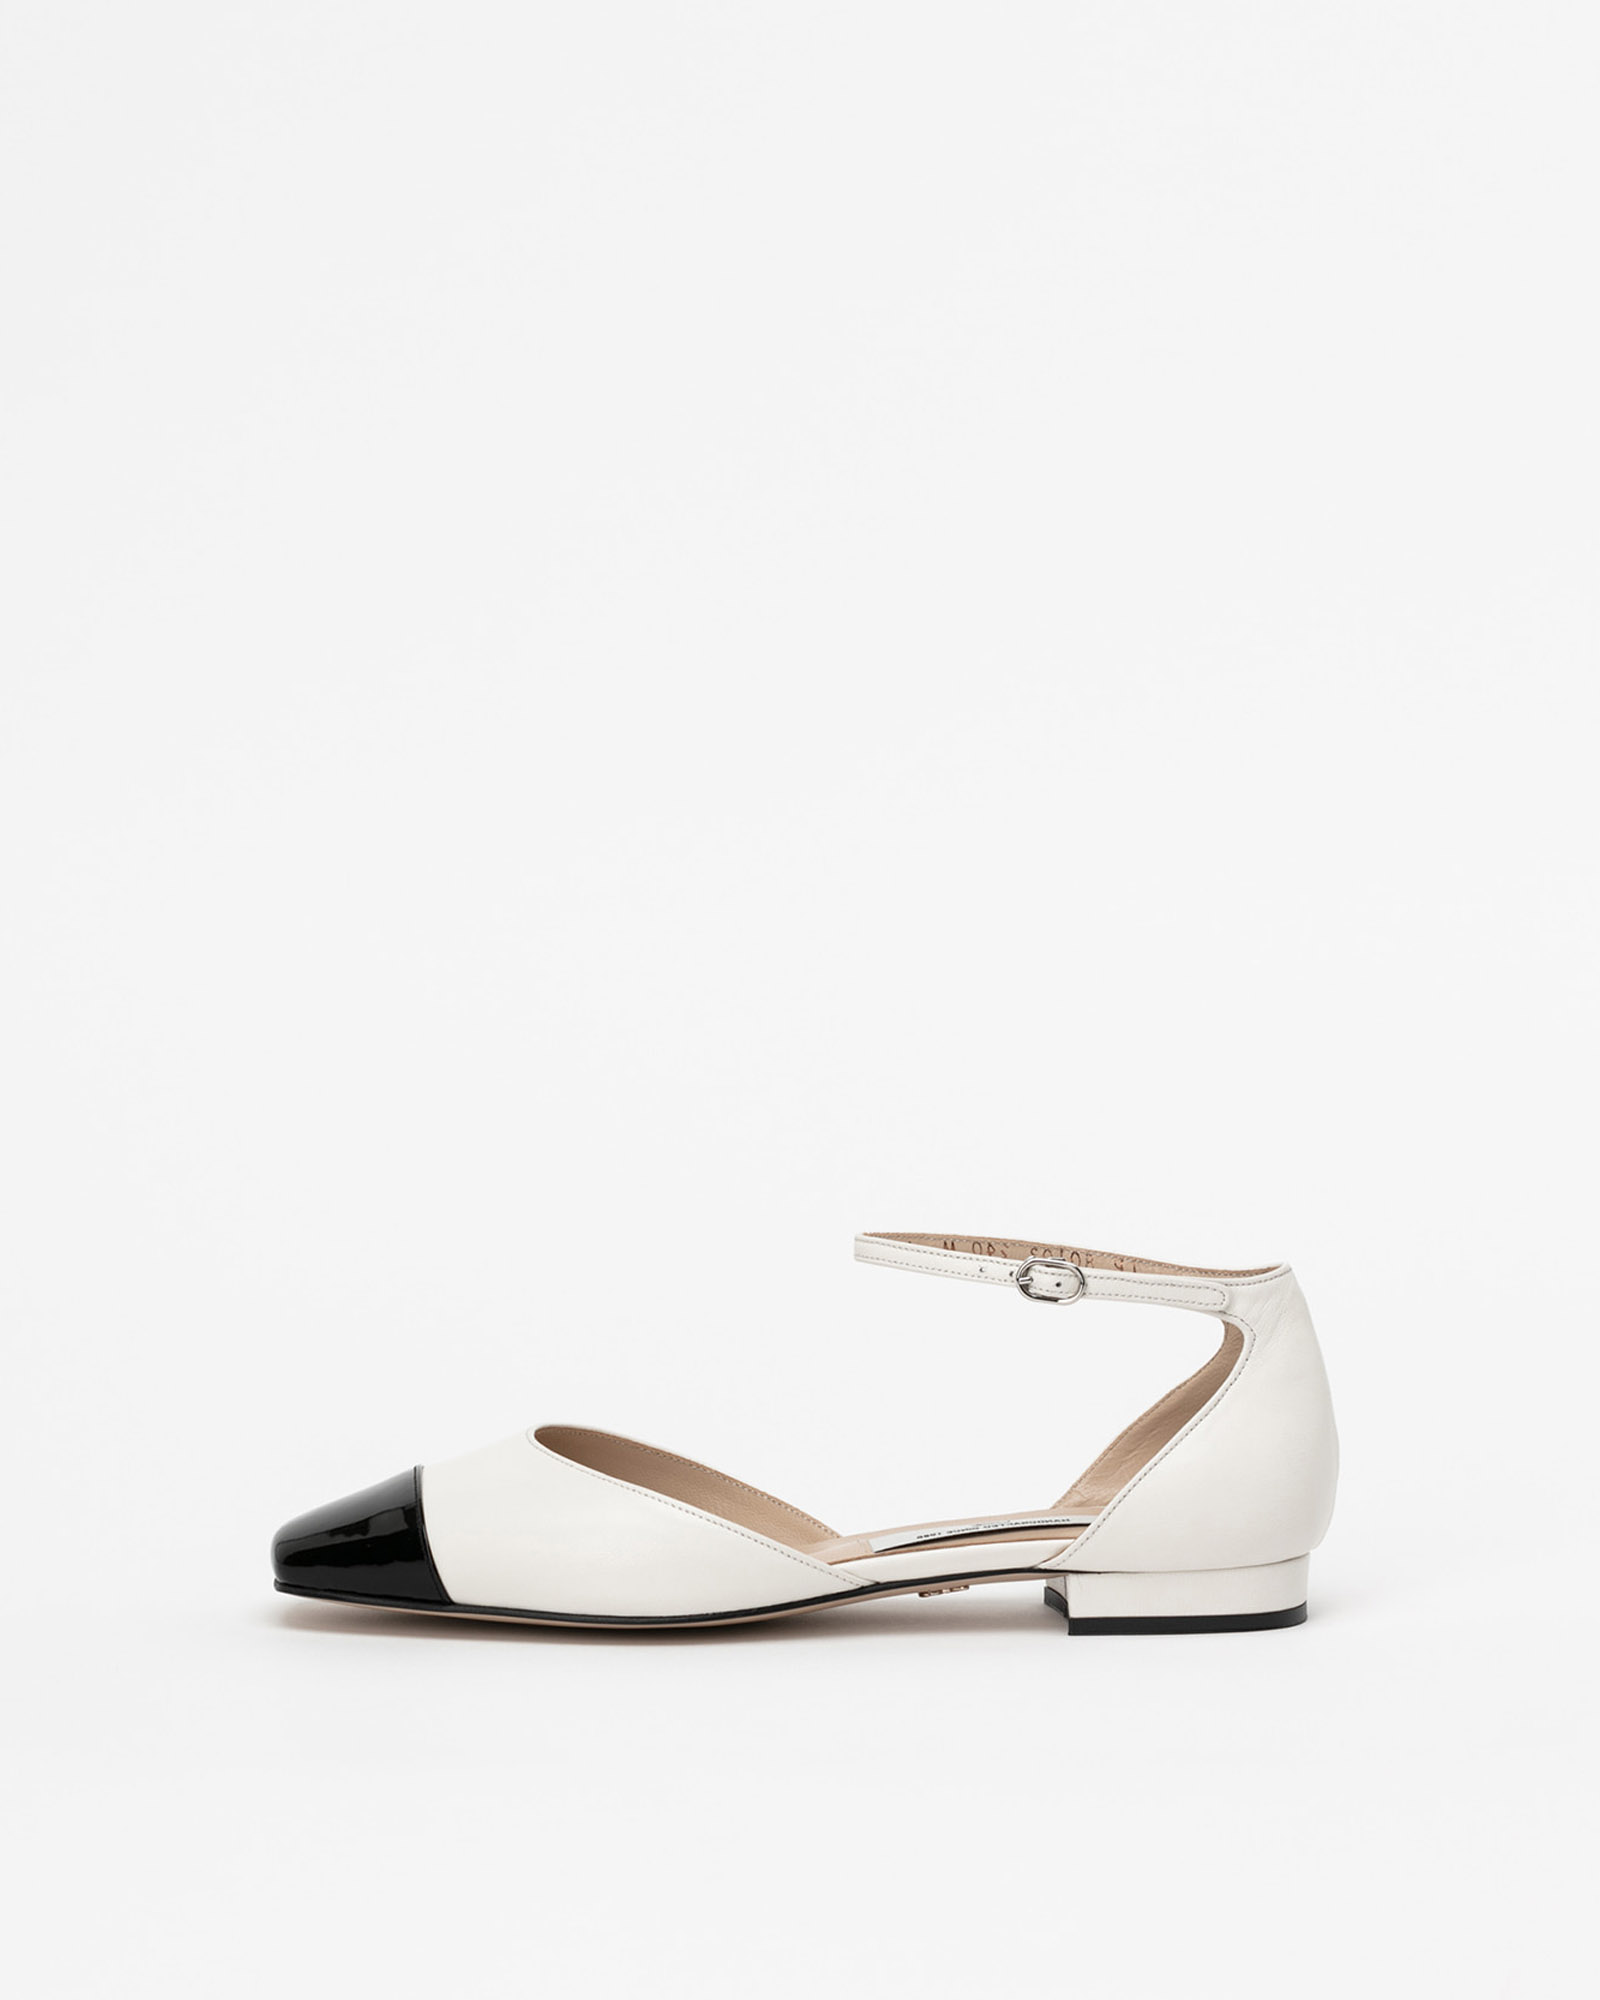 Castela Strap Flat Shoes in White with Black Toe